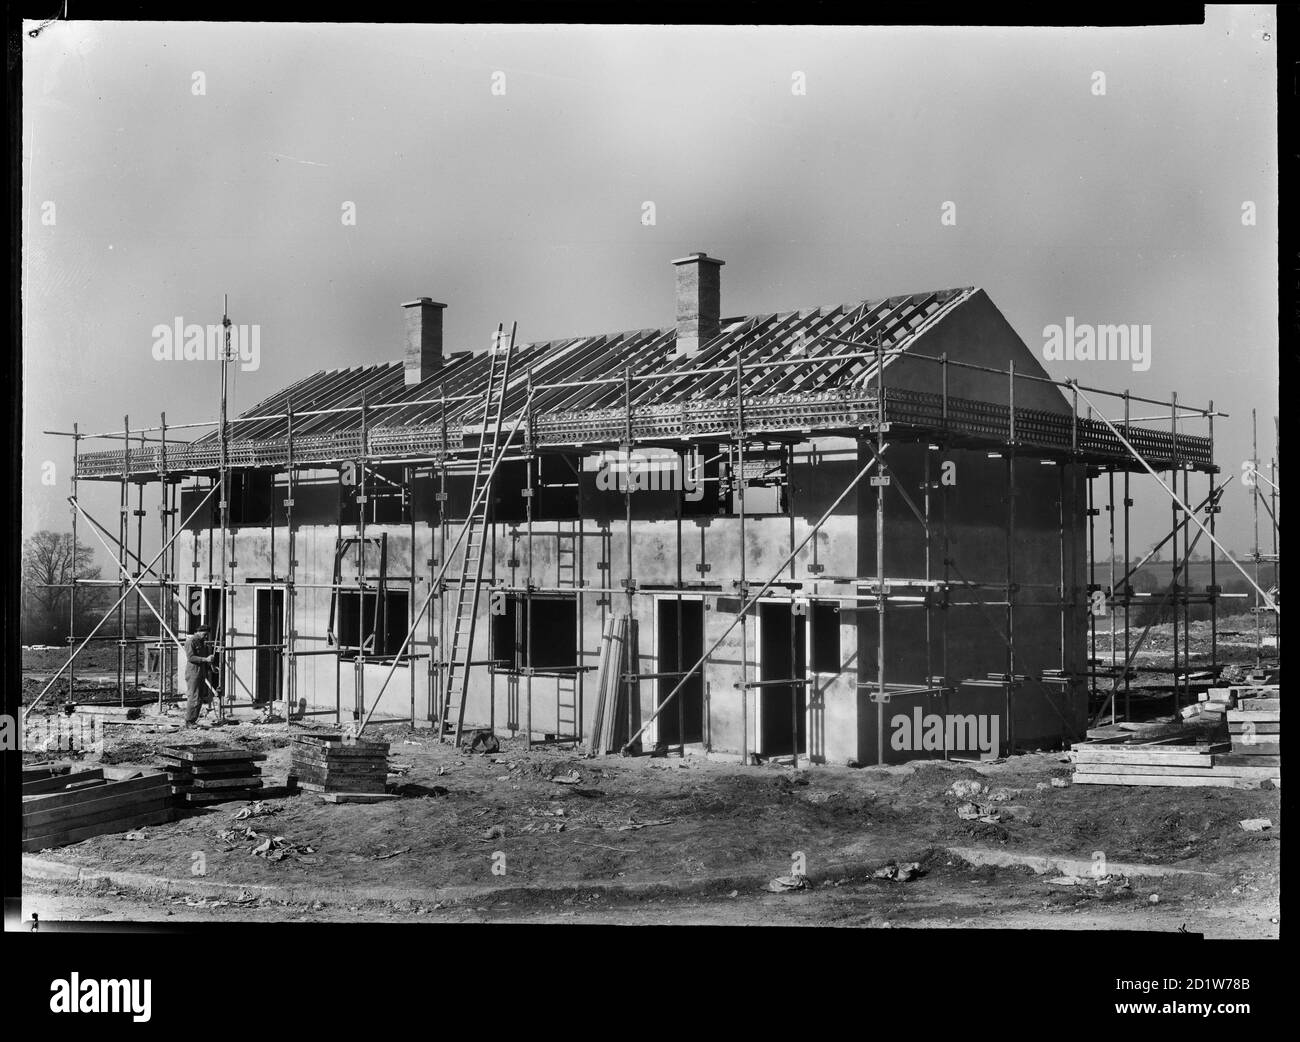 A pair of semi-detached Easiform houses under construction on the Penhill Estate, Penhill, Swindon, Wiltshire, UK. Stock Photo